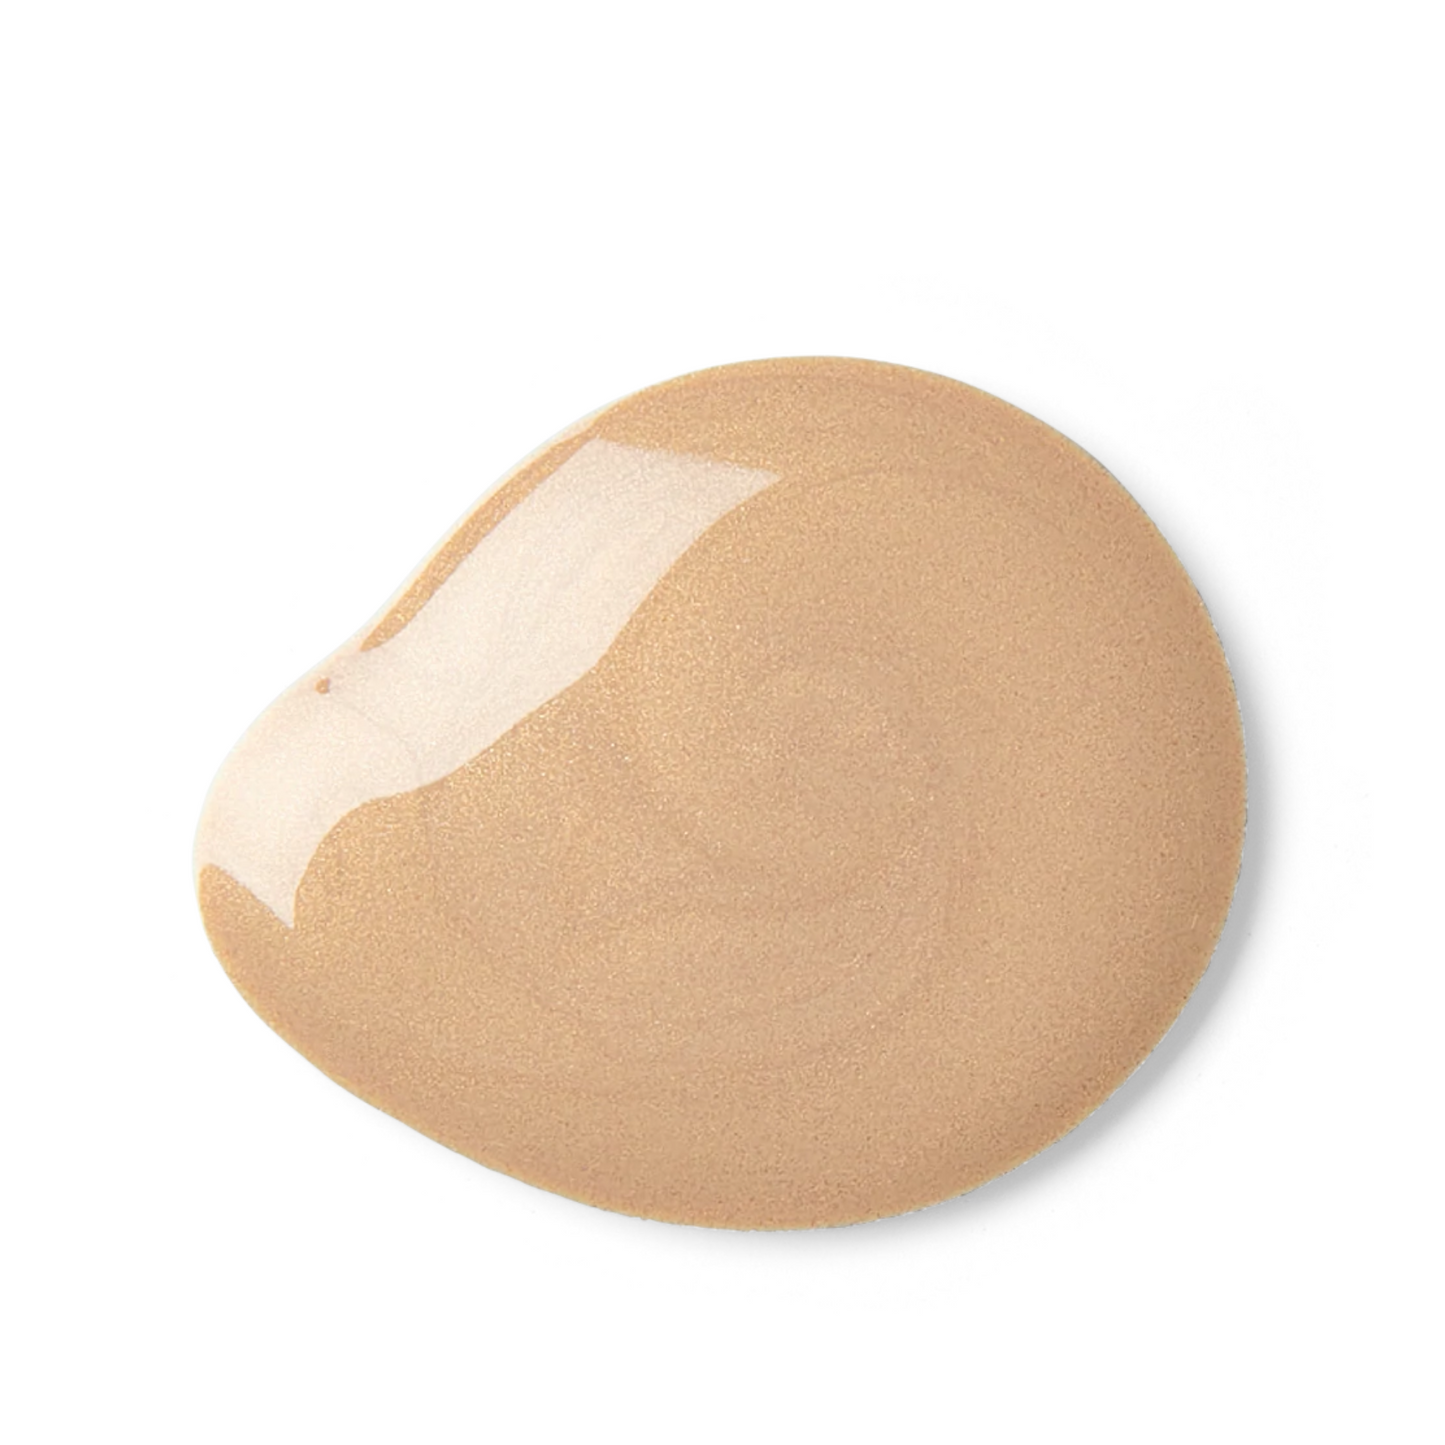 Colorescience Sunforgettable® Total Protection™ Face Shield GLOW SPF 50